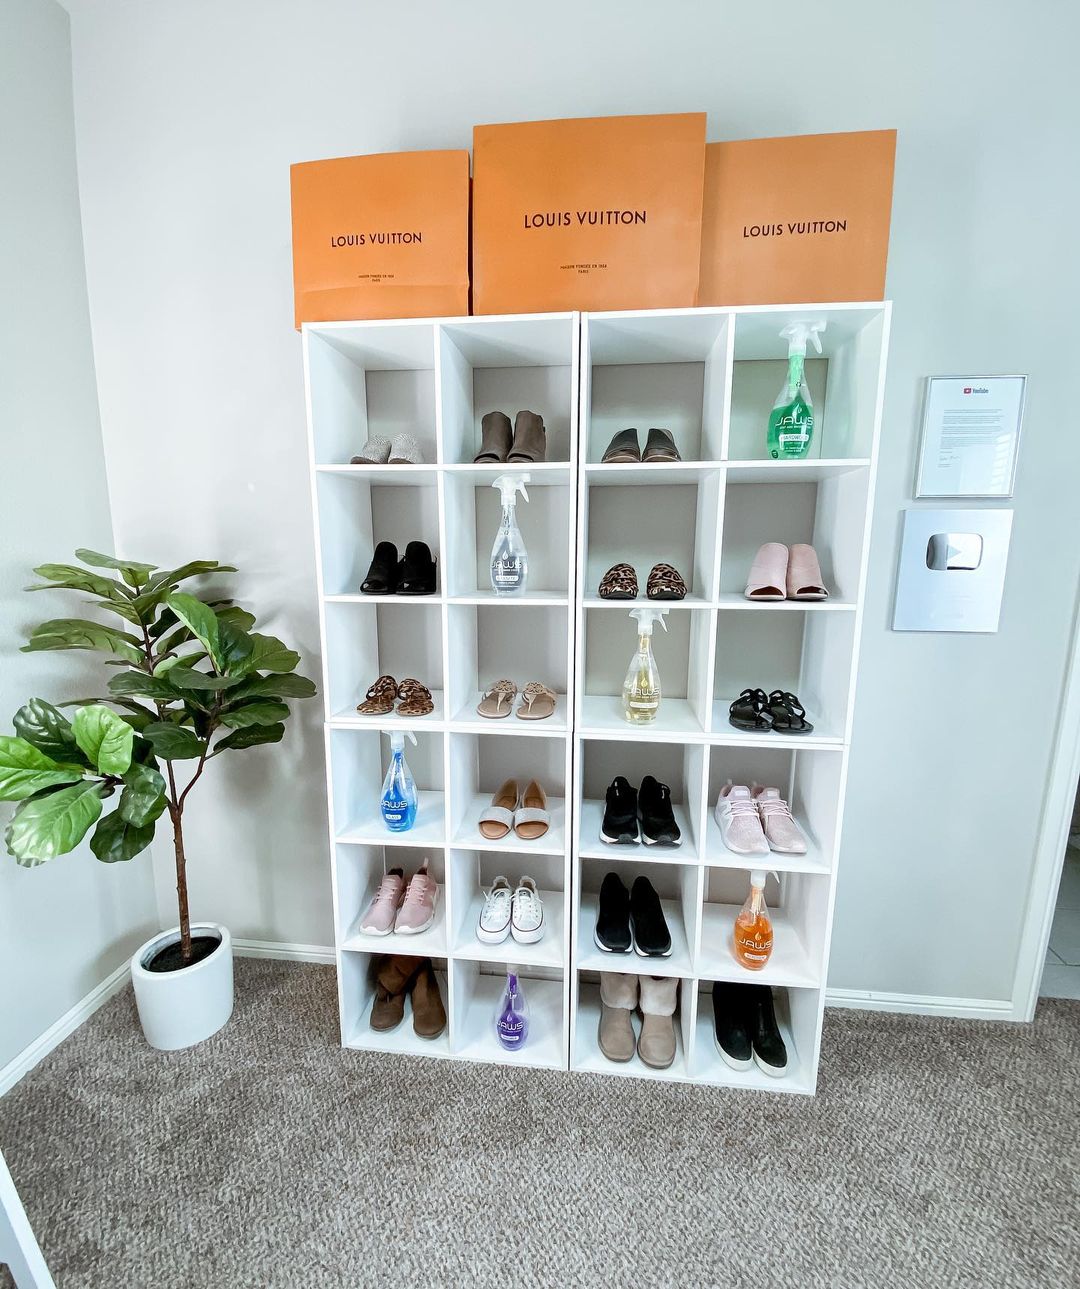 Shoes Displayed in a Cubbies in a Bedroom. Photo by Instagram user @tilvacuumdouspart